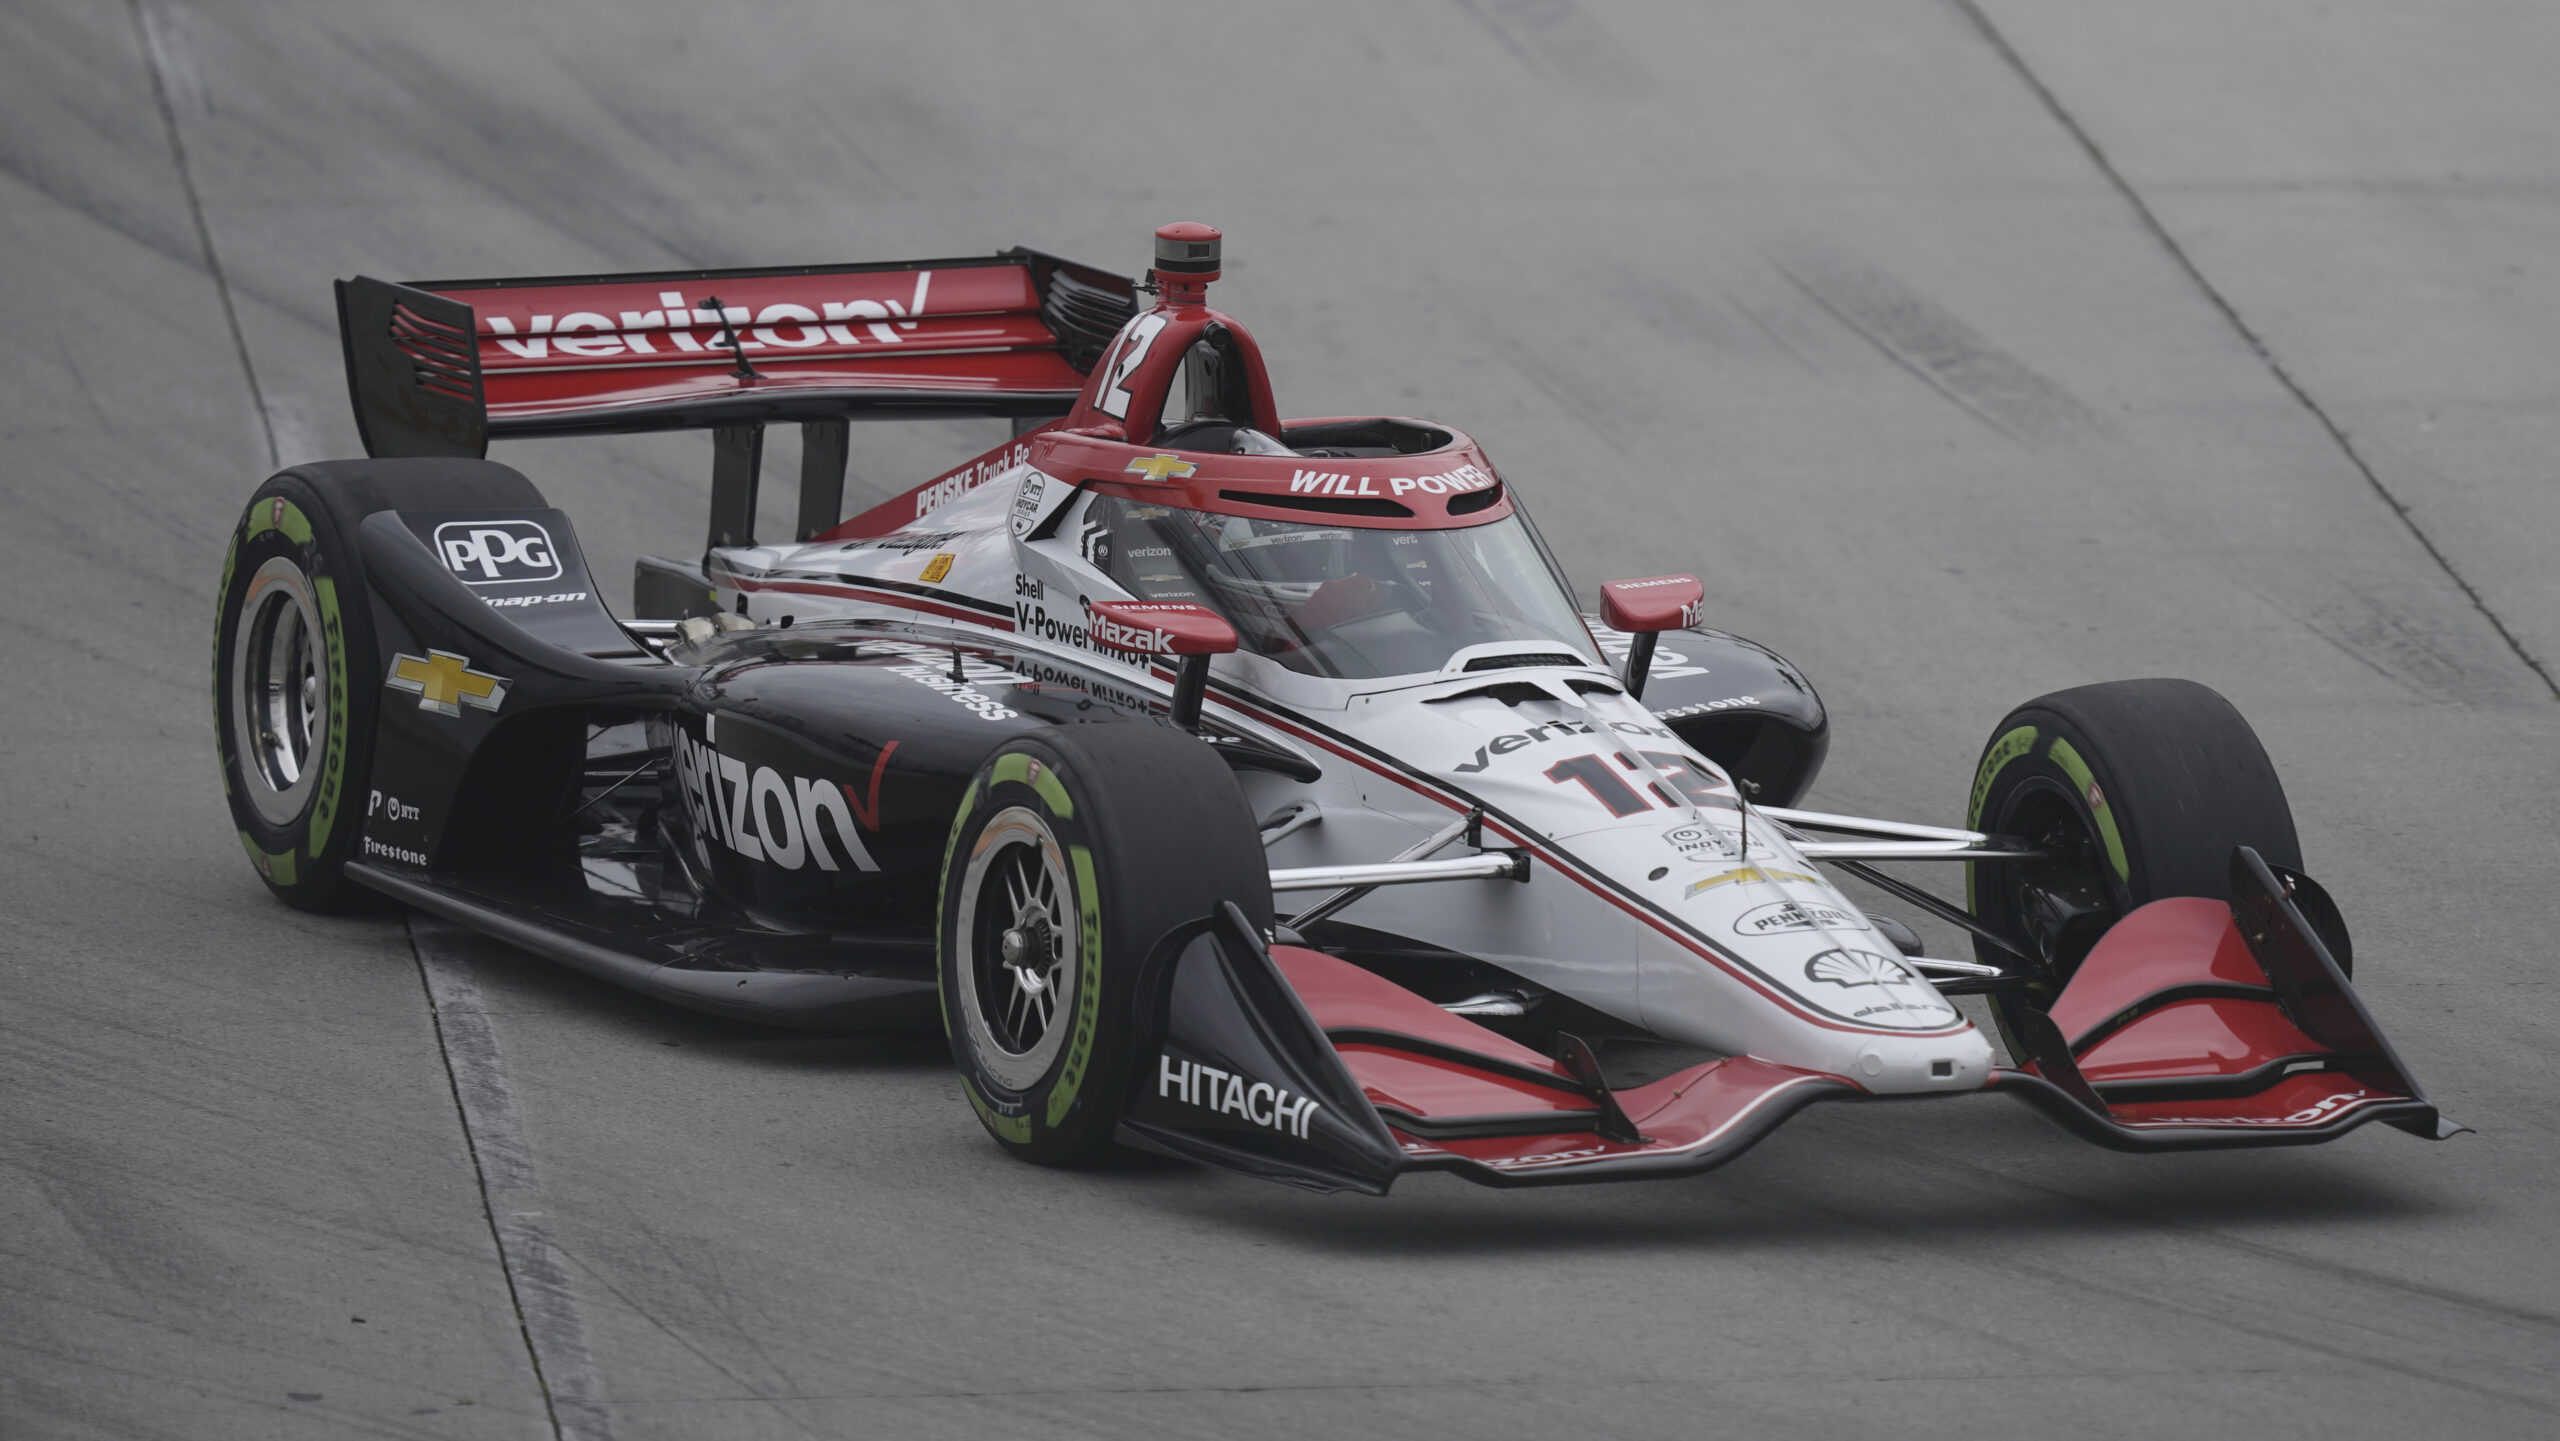 four-top-executives-of-the-penske-team-are-suspended-for-altering-their-cars-in-indycar